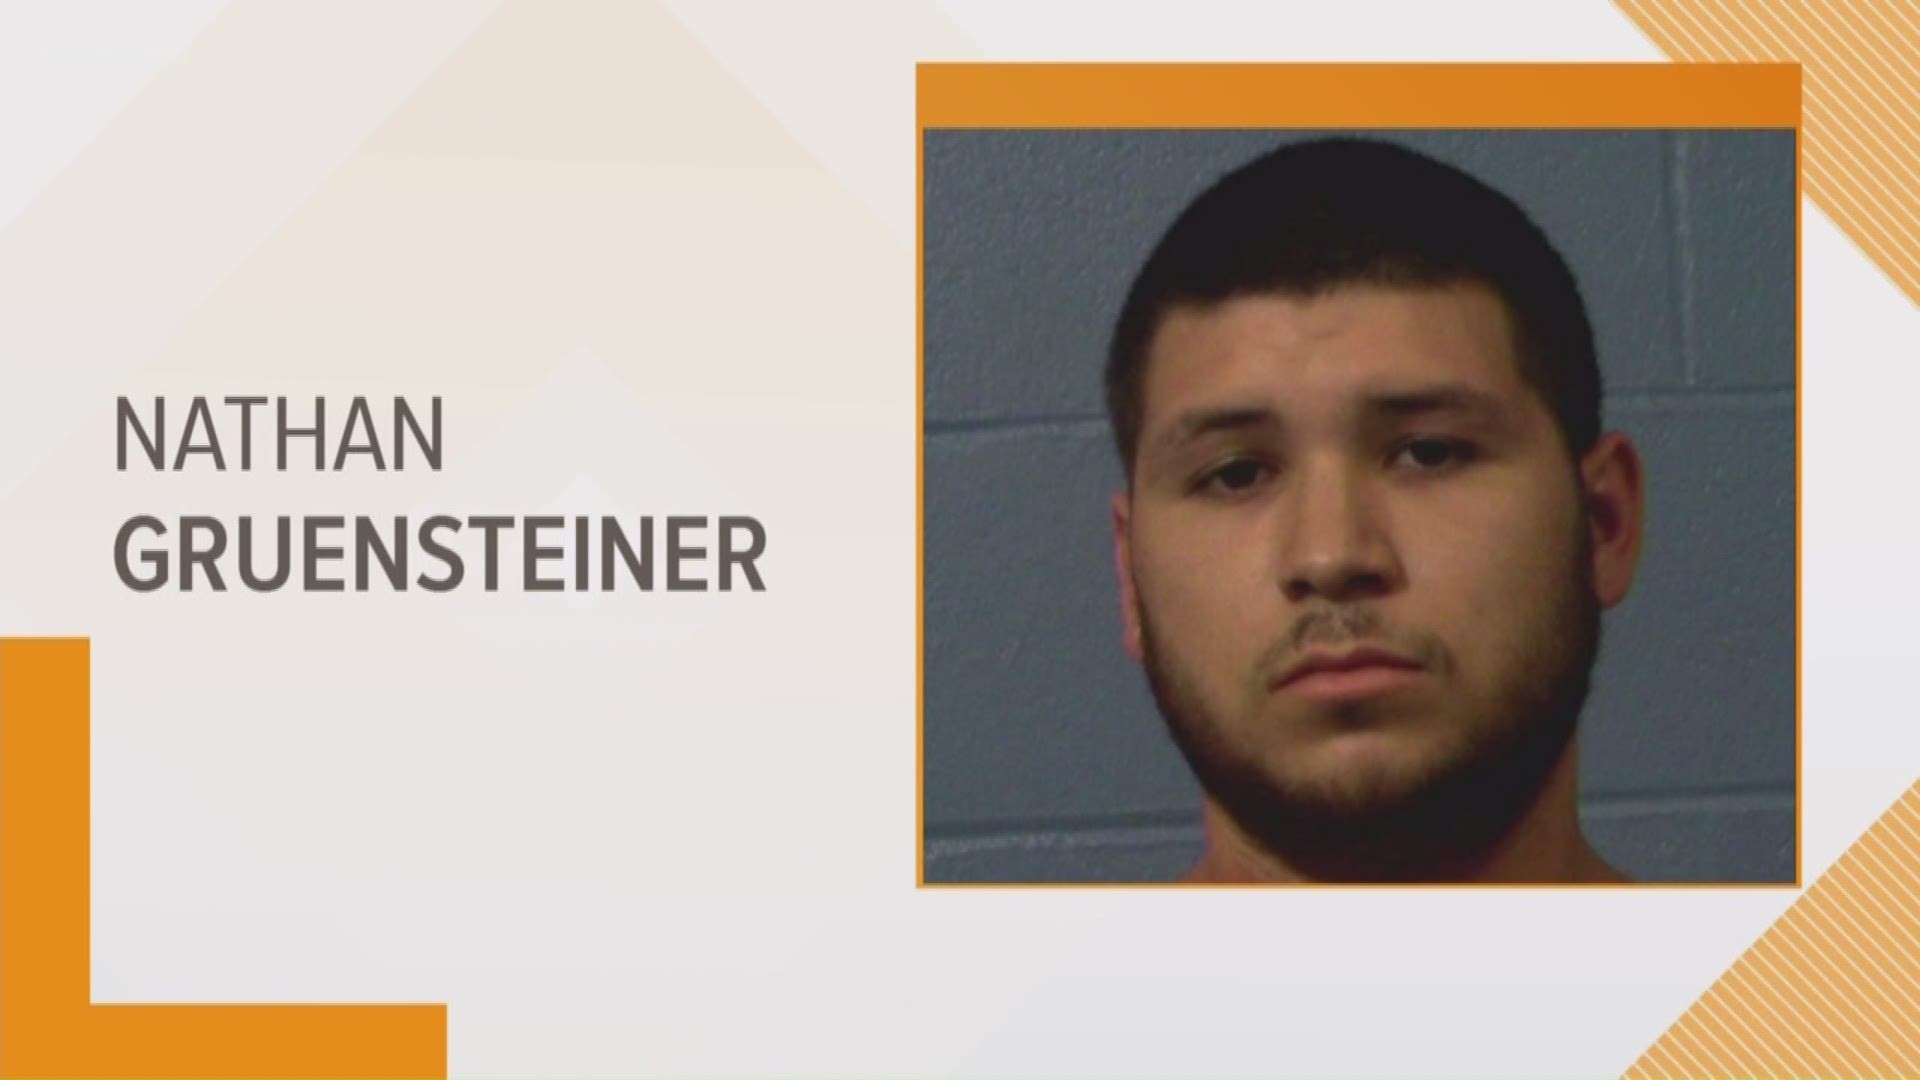 Nathan Gruensteiner was booked into the Williamson County Jail on Oct. 7.